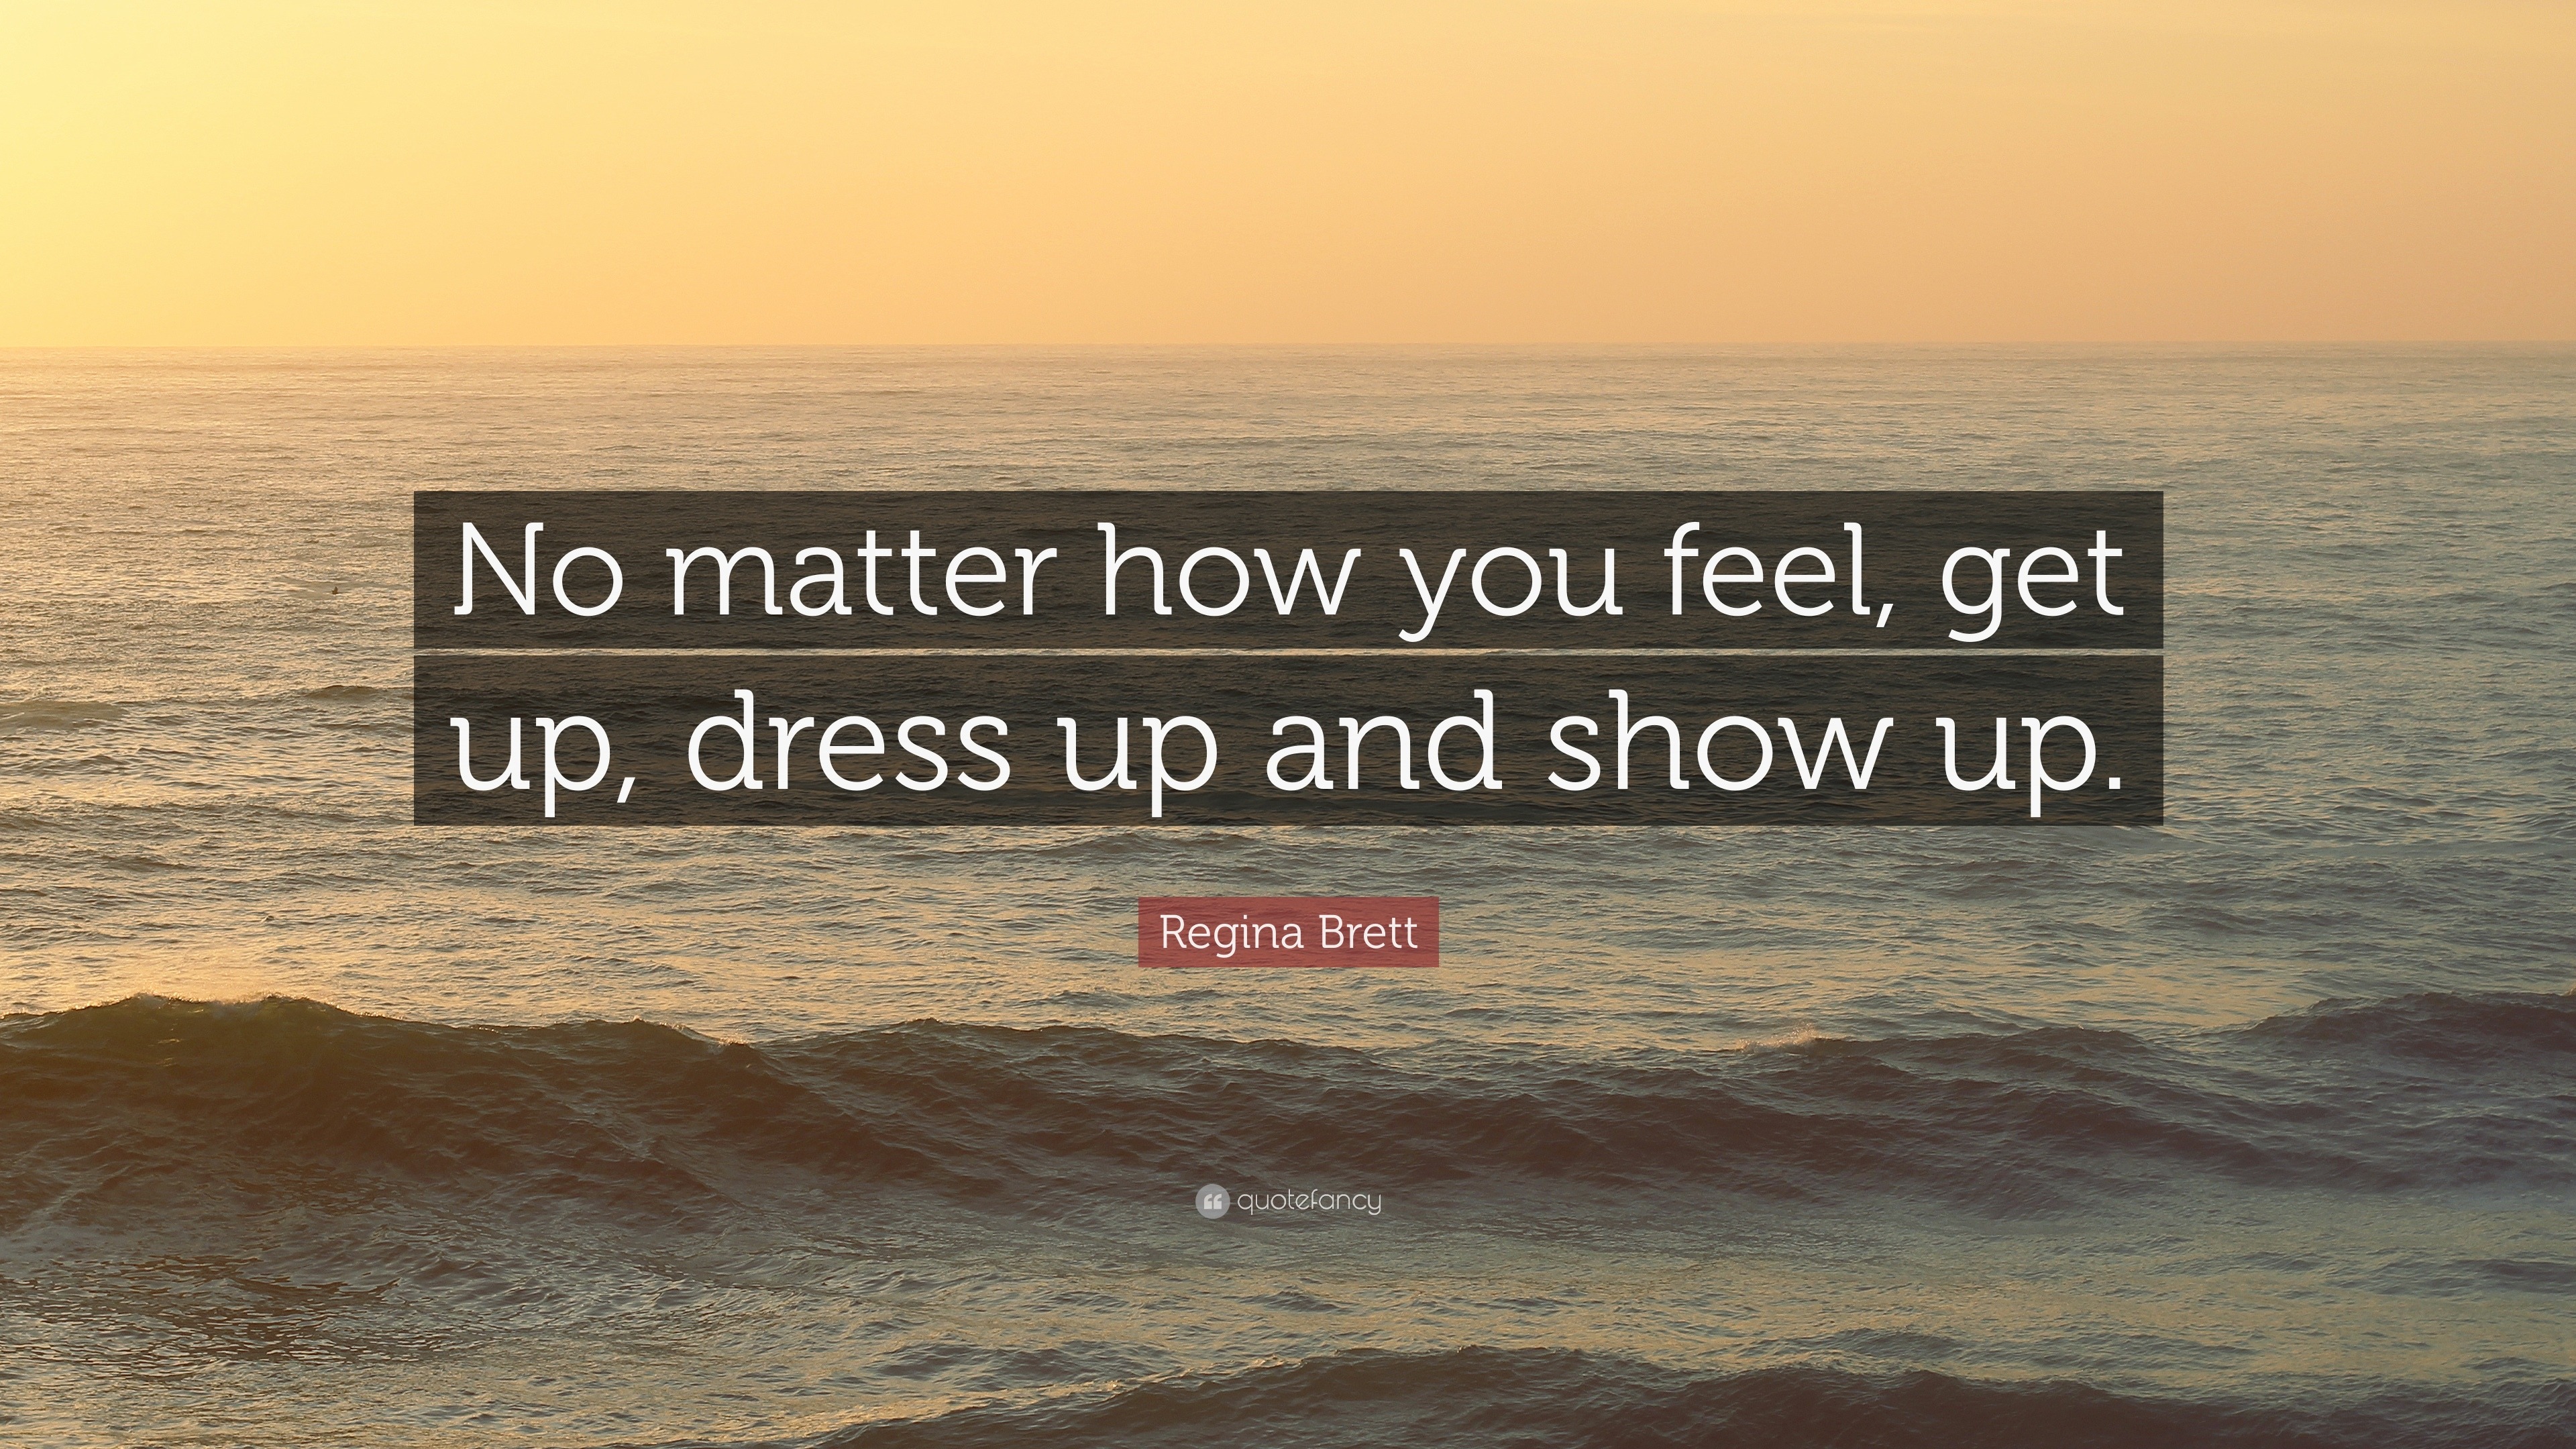 Regina Brett Quote: “No matter how you feel, get up, dress up and show up.”